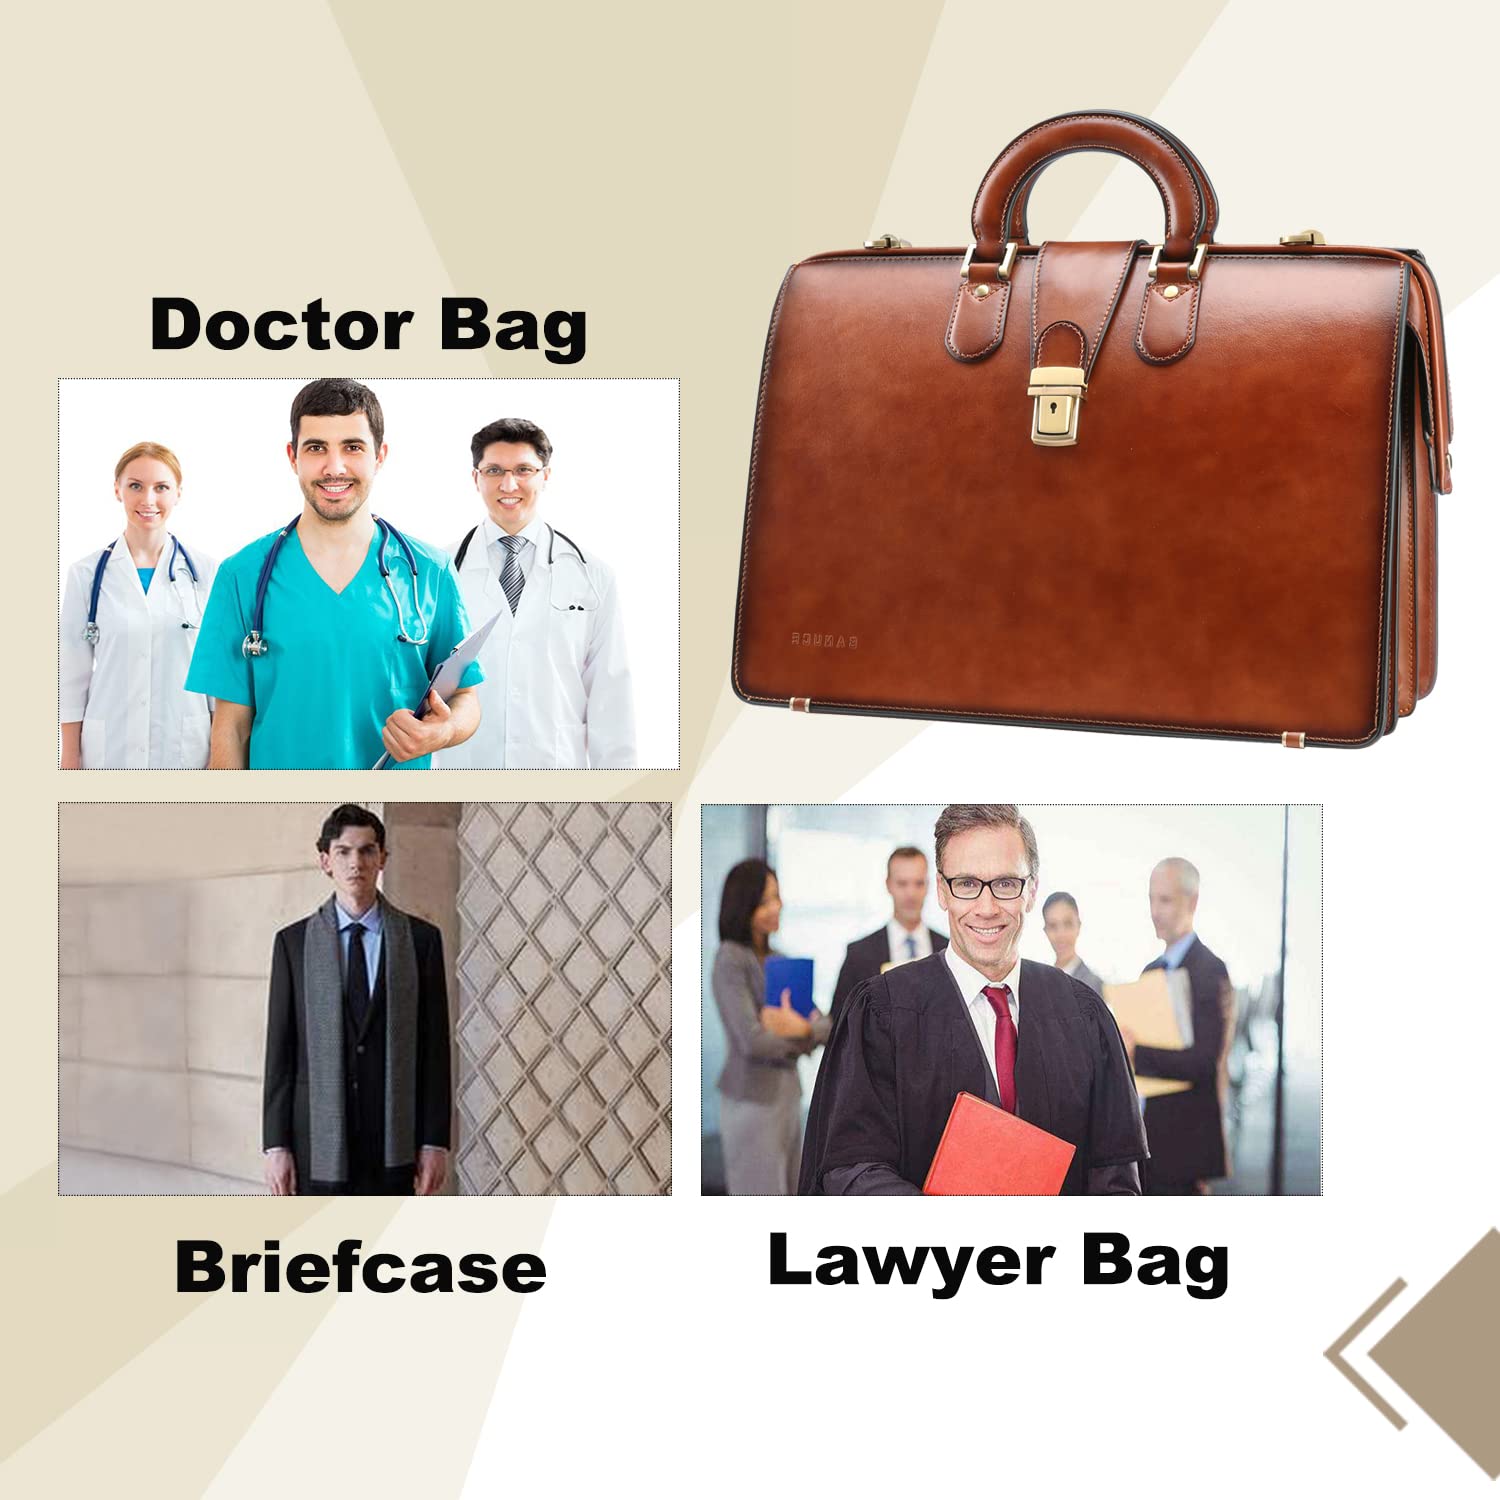 Banuce Vintage Leather Briefcase for Men with Lock Lawyer Attorney Bag Doctor Bag 15.6 Inch Laptop Attache Case Hard